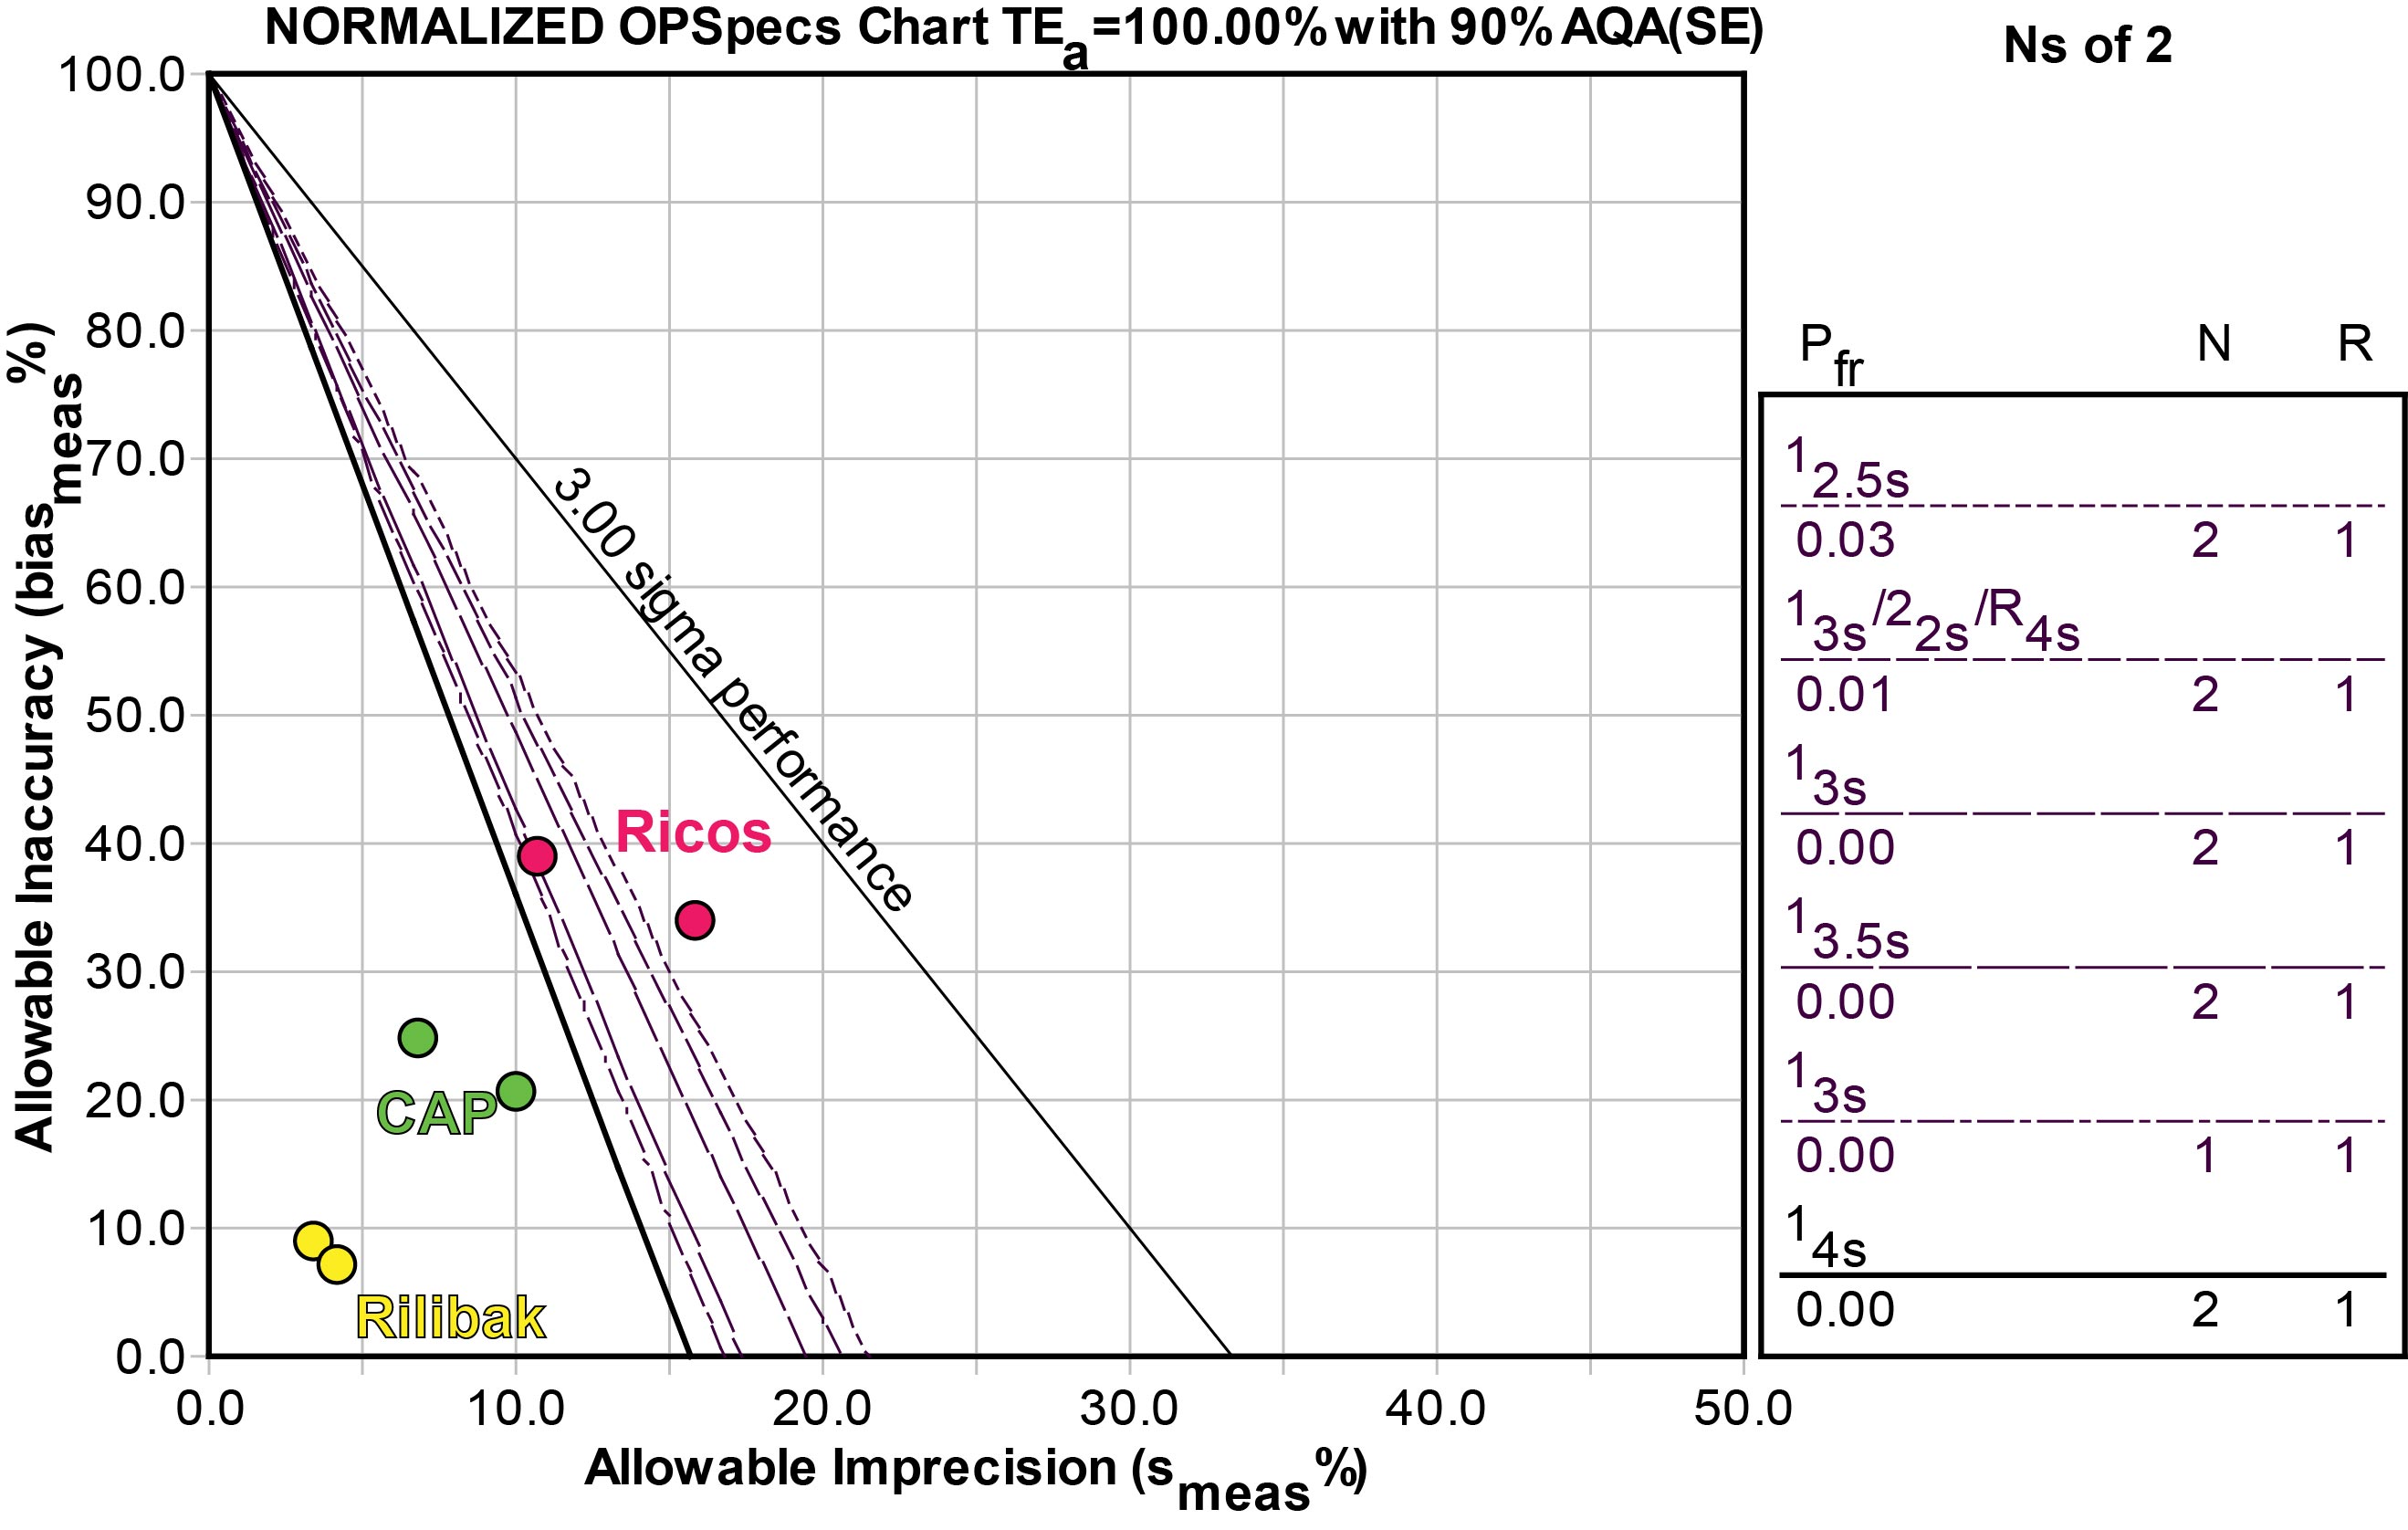 2012-ARKRAY-H8180-HbA1c Normalized OPSpecs Chart, for 2 controls